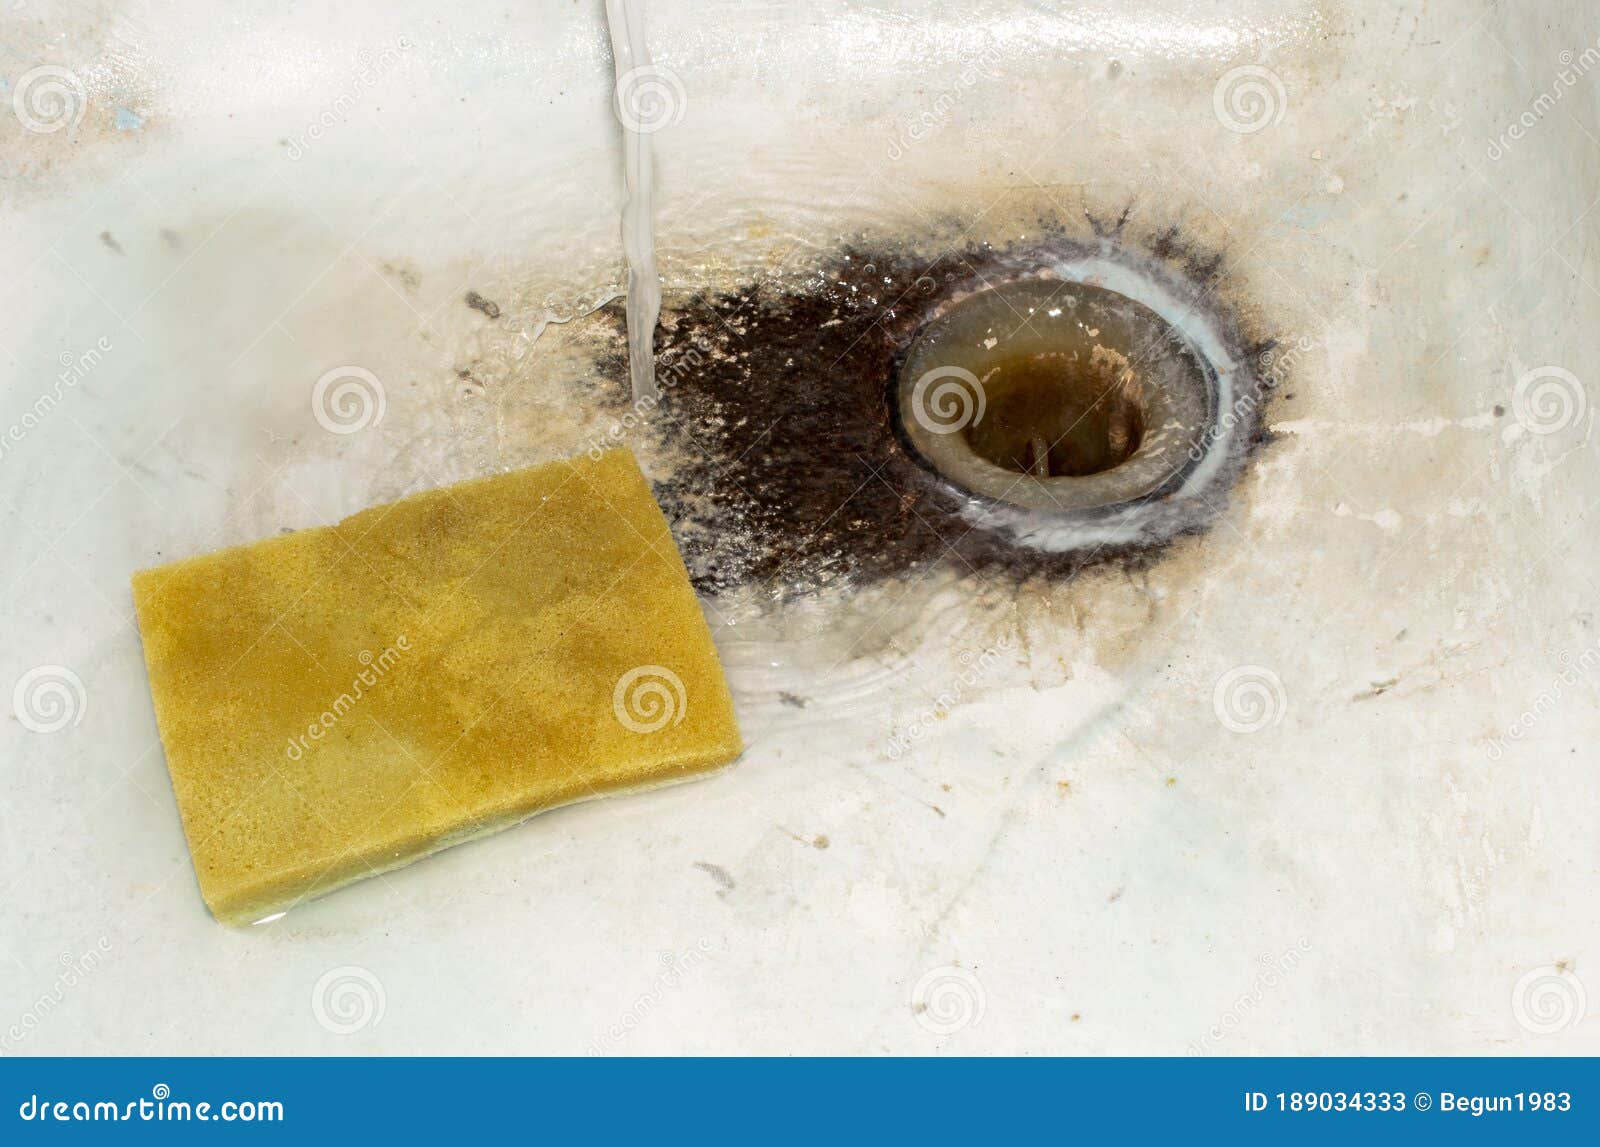 https://thumbs.dreamstime.com/z/old-cast-iron-sink-old-cast-iron-sink-cleaning-rusty-cast-iron-sink-189034333.jpg